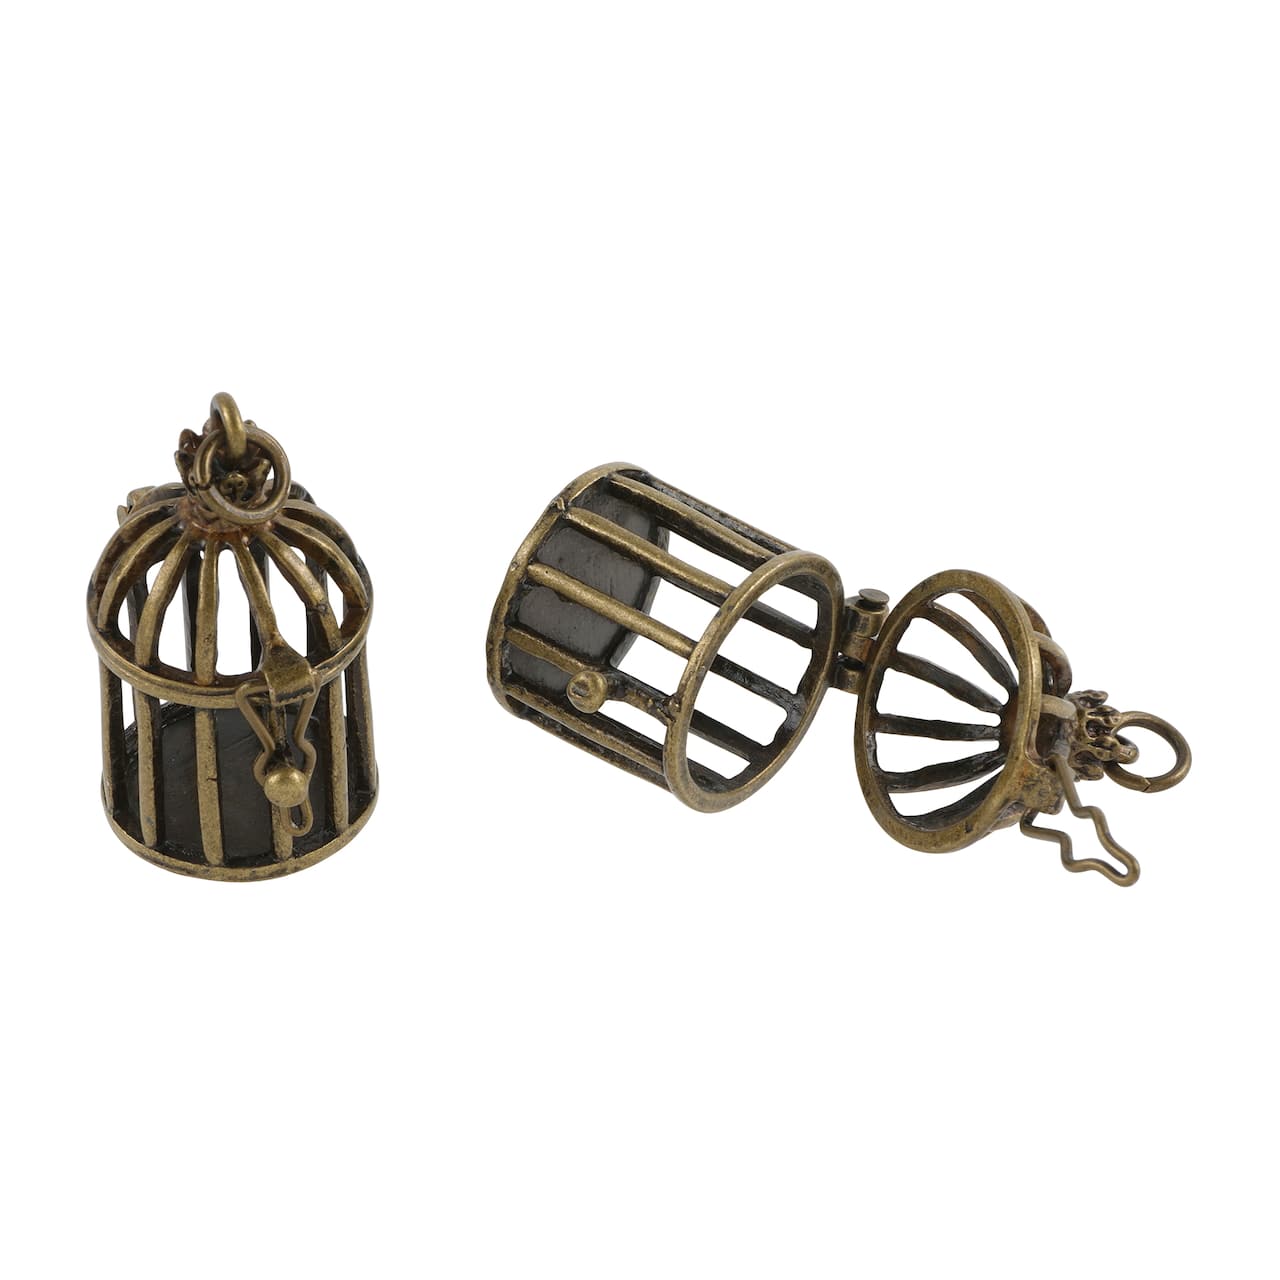 Found Objects Bird Cage Charms by Bead Landing&#x2122;, 28mm